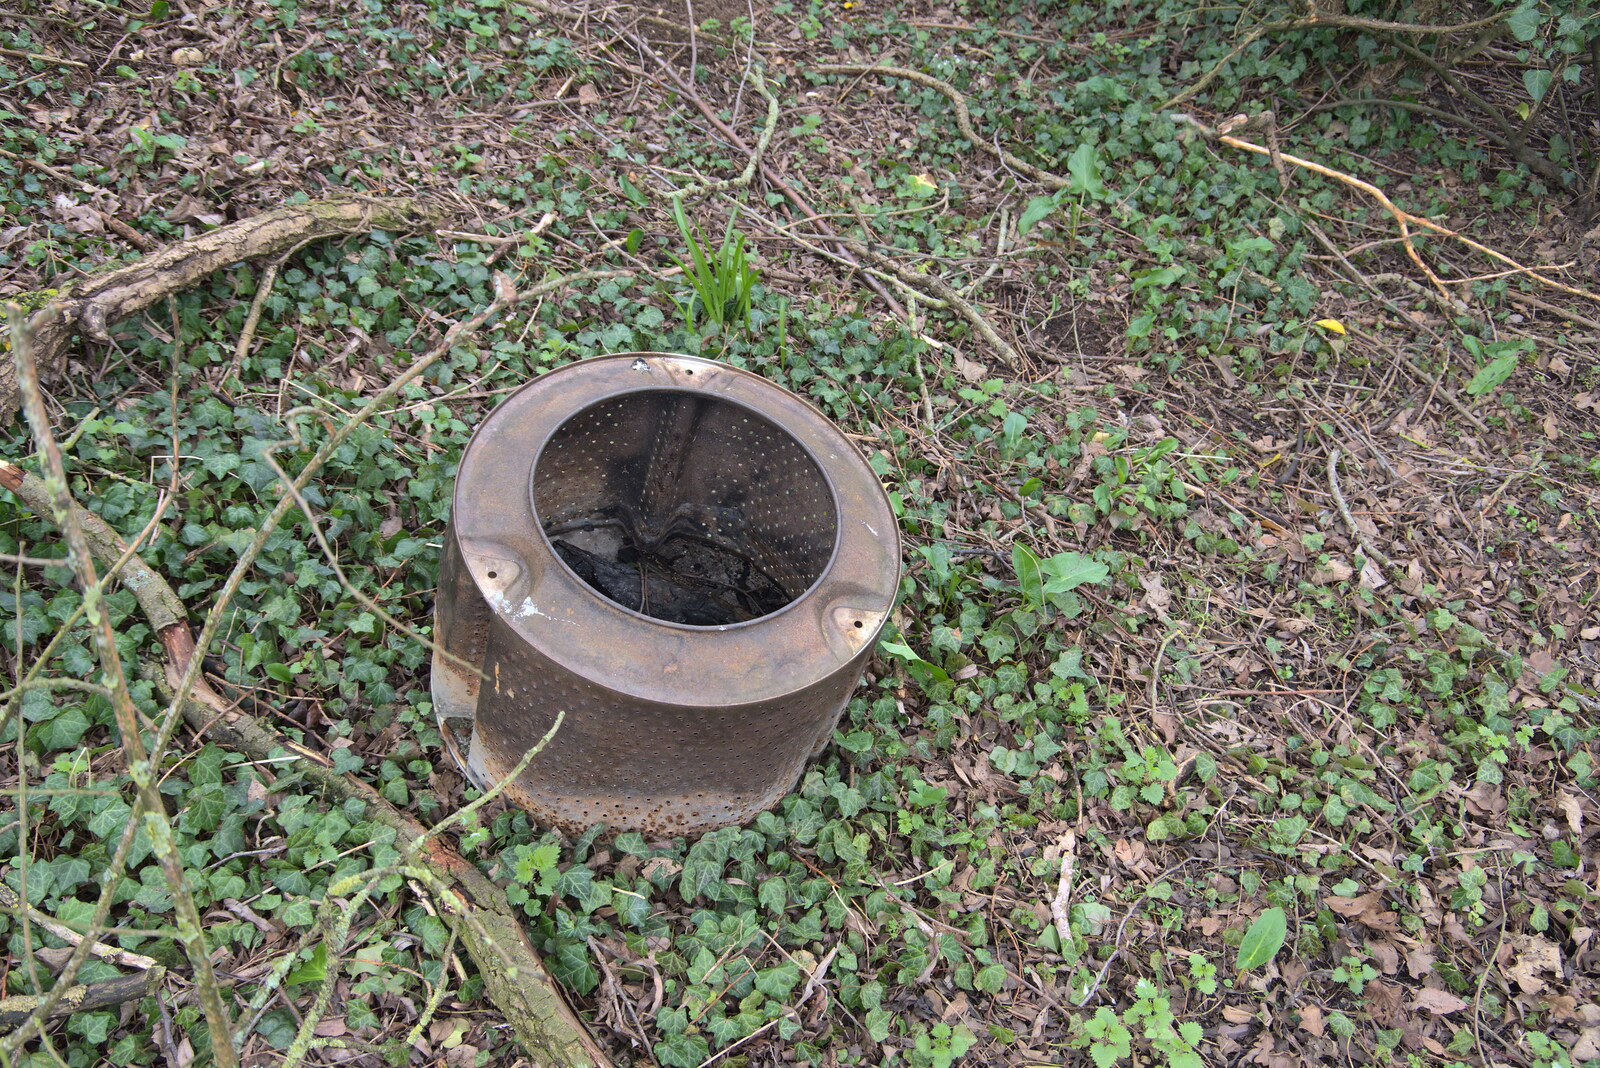 There's a washing machine drum lying around from Weybread Pits and a Sunday Walk, Brome, Suffolk - 6th March 2022